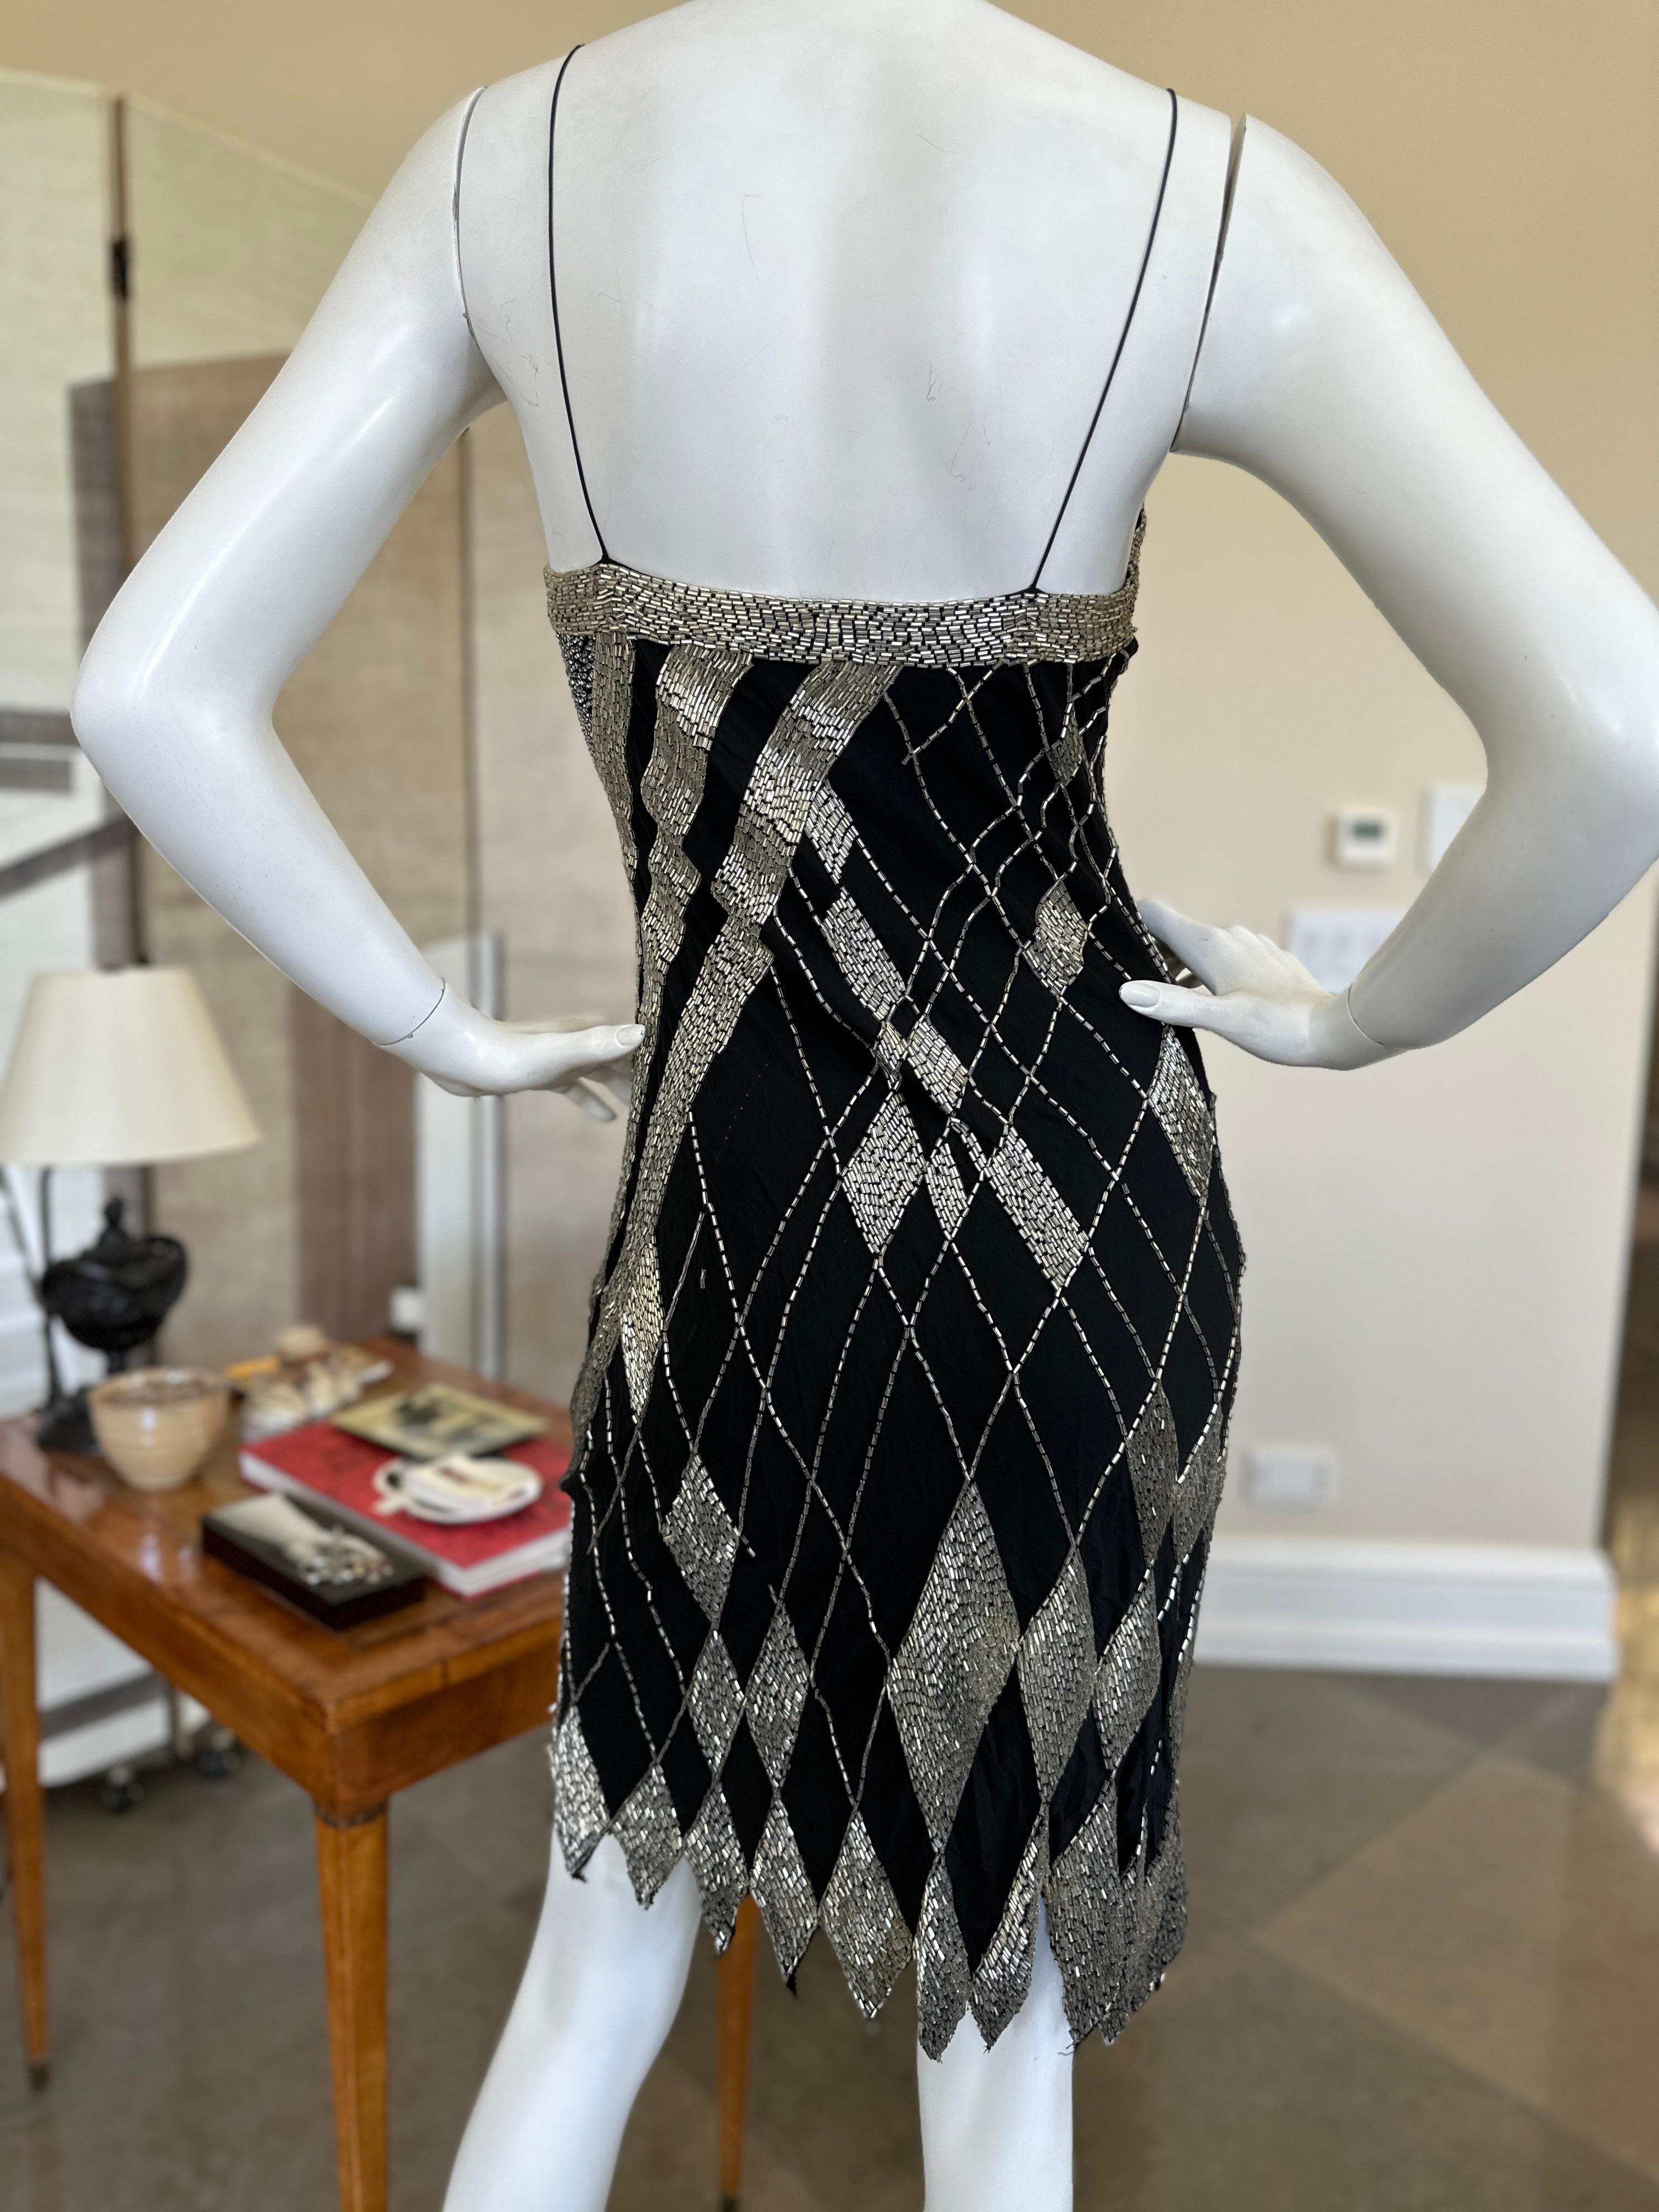 Fabrice Black Silk Beaded Vintage Cocktail Dress with Silver Harlequin Beading
 Size S, there is no zipper or buttons.
 Bust 36